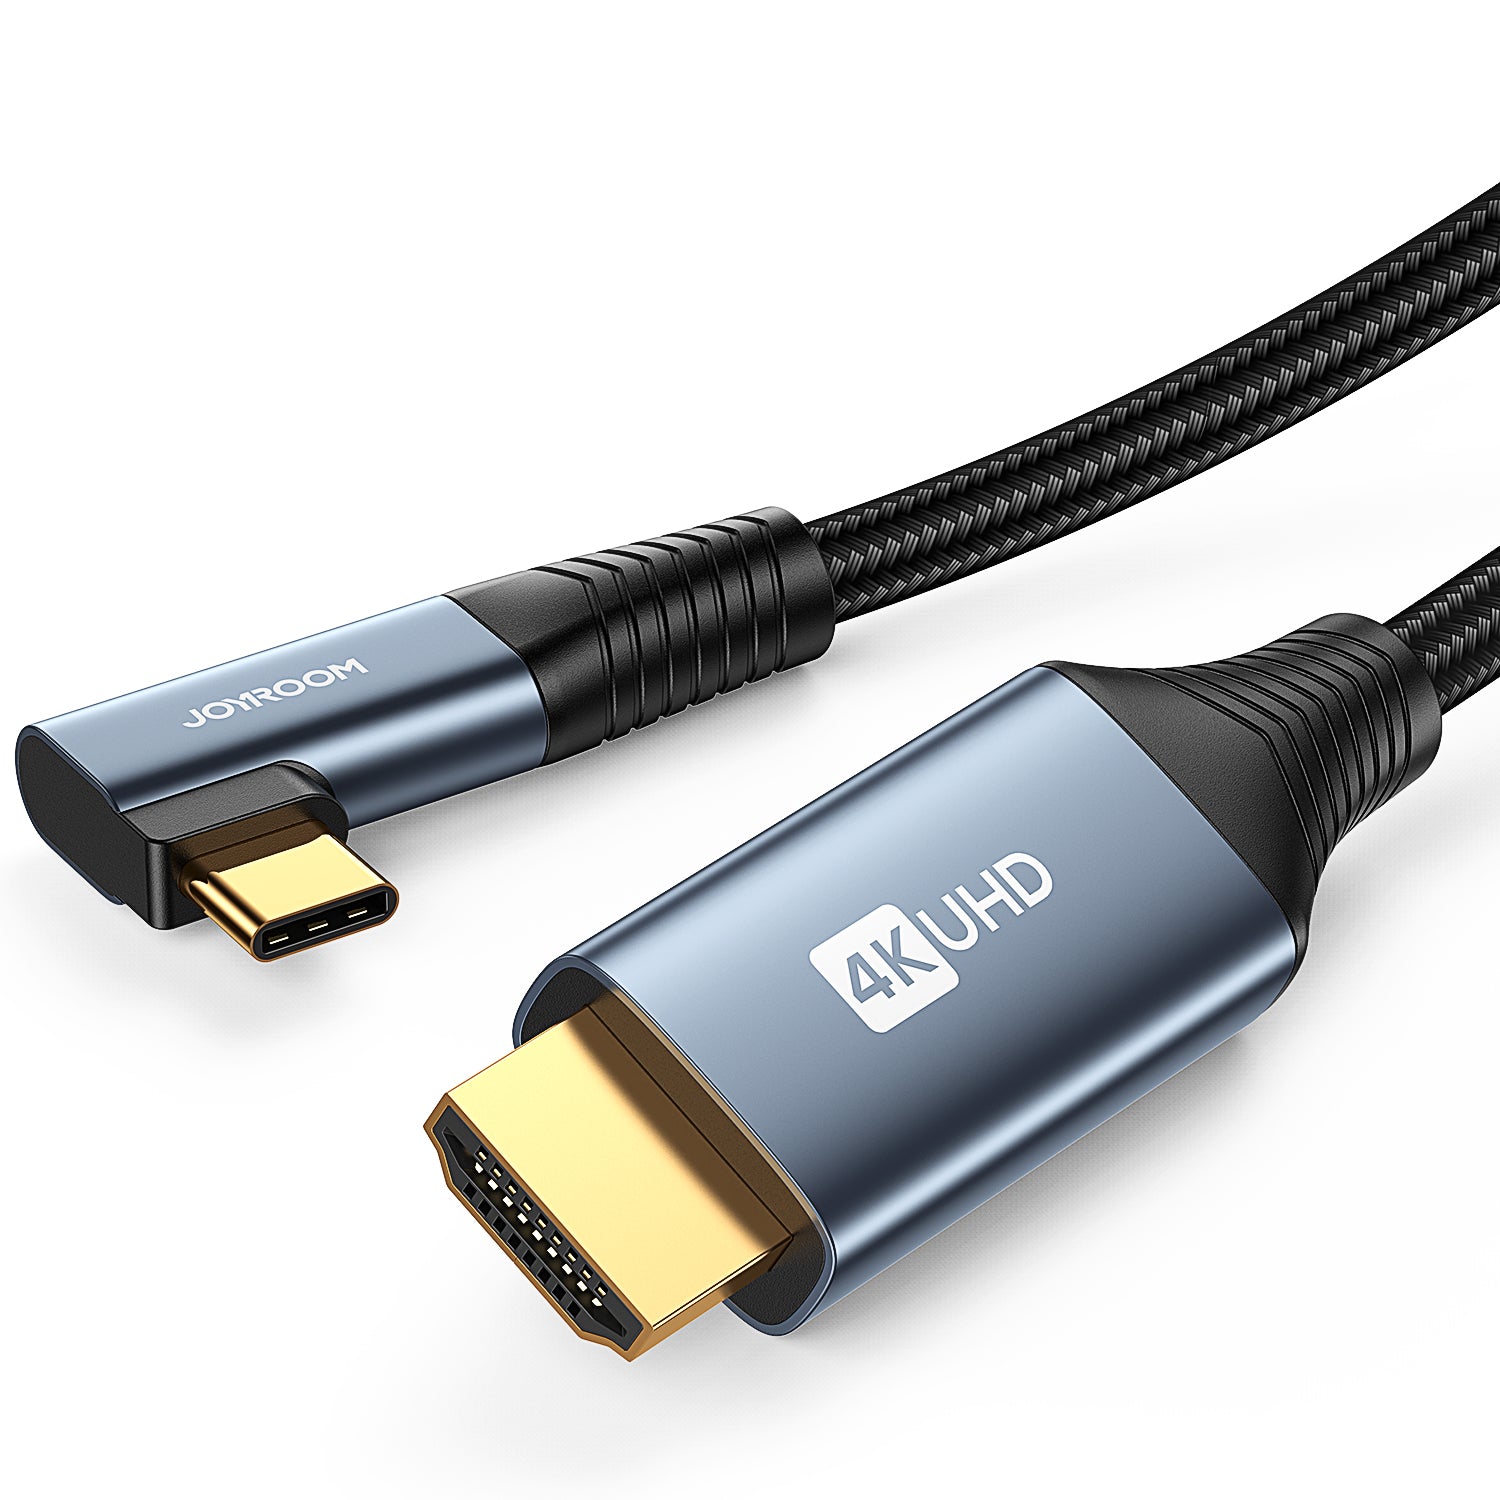 Cable hdmi 4k - 2m